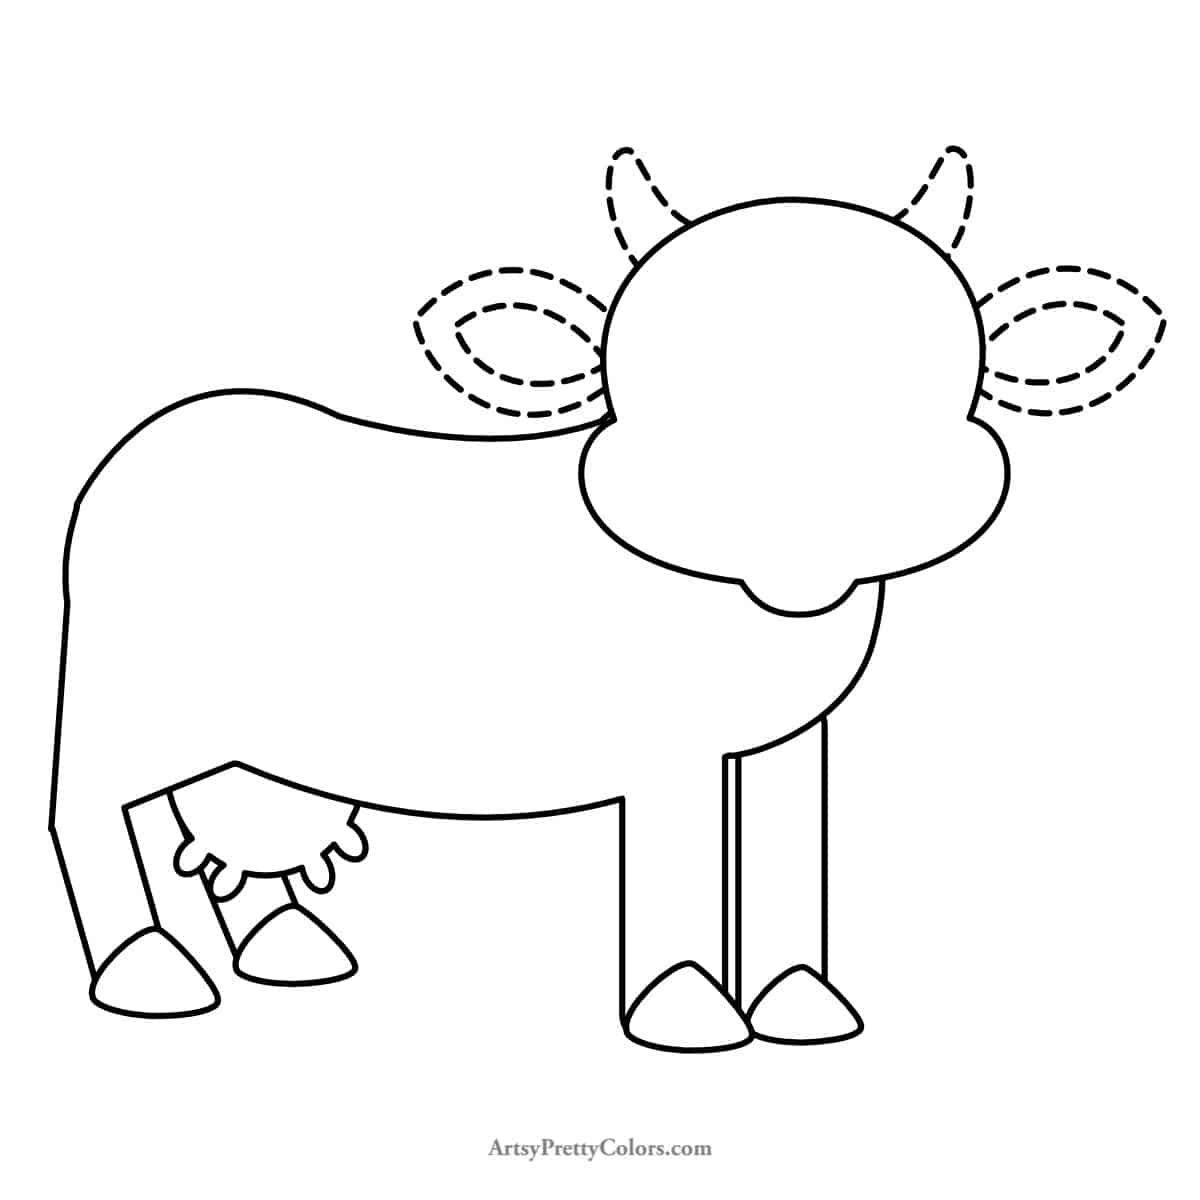 lines for drawing the bulls ears and horns